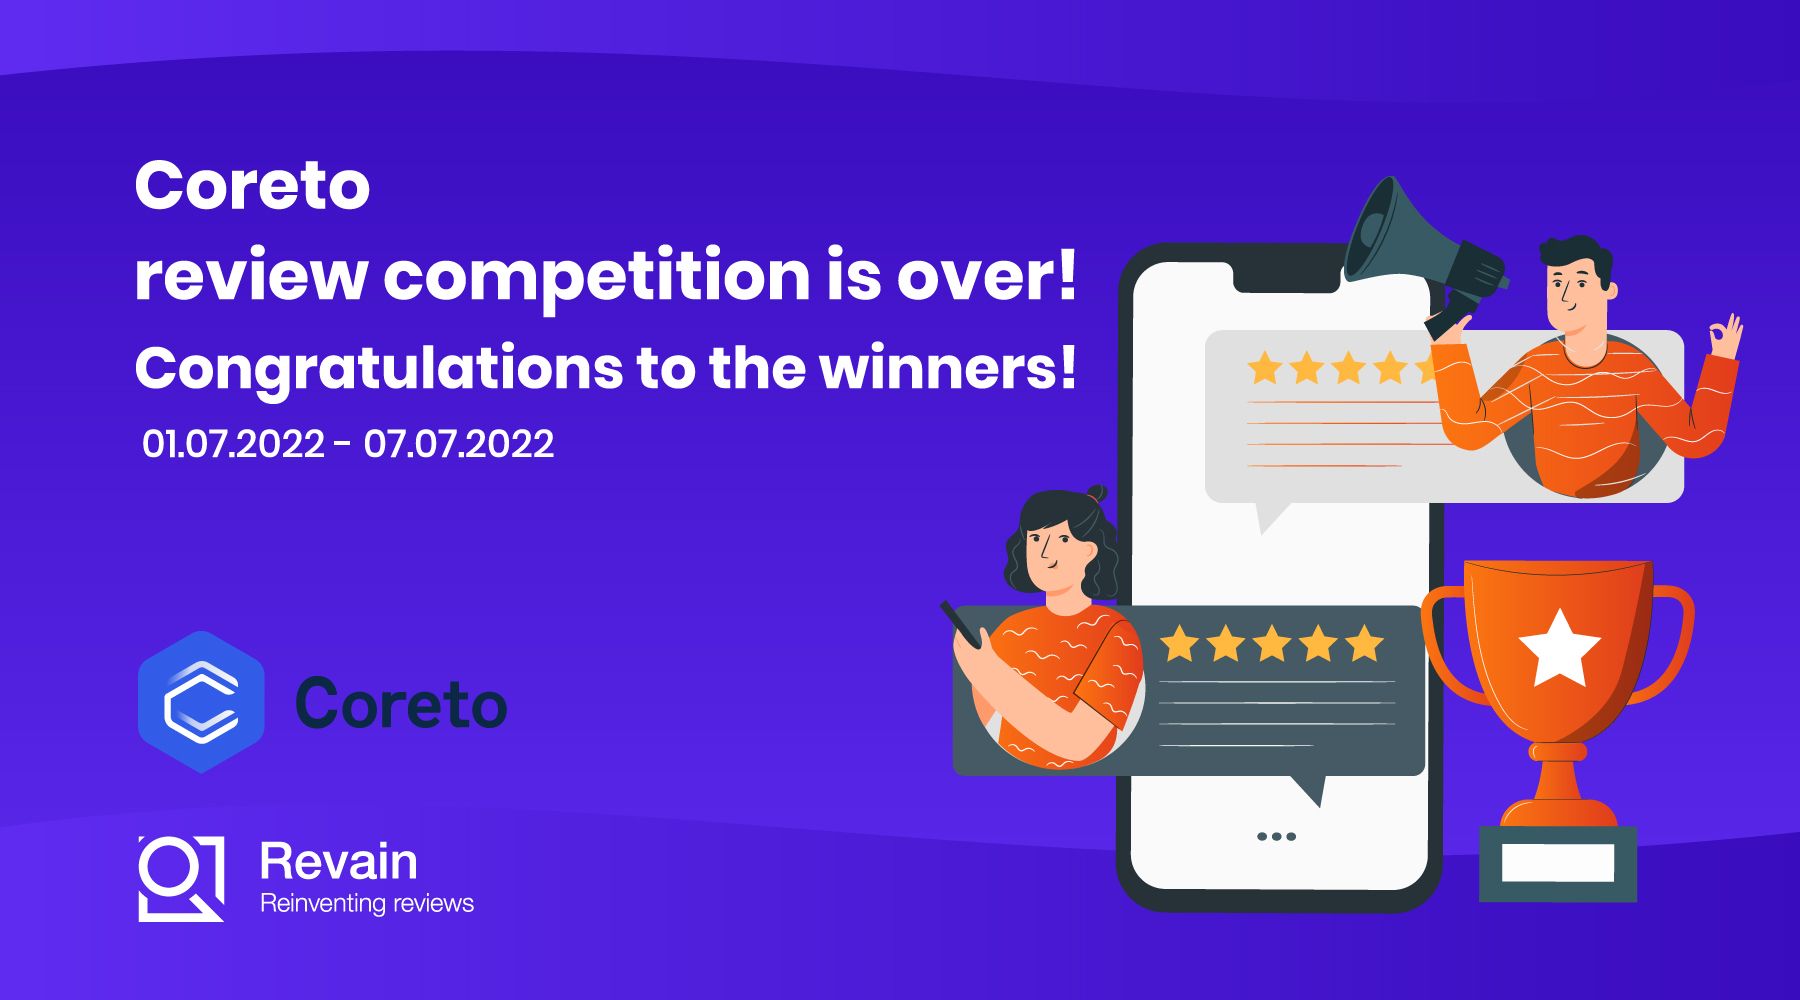 Article Coreto review competition is over!